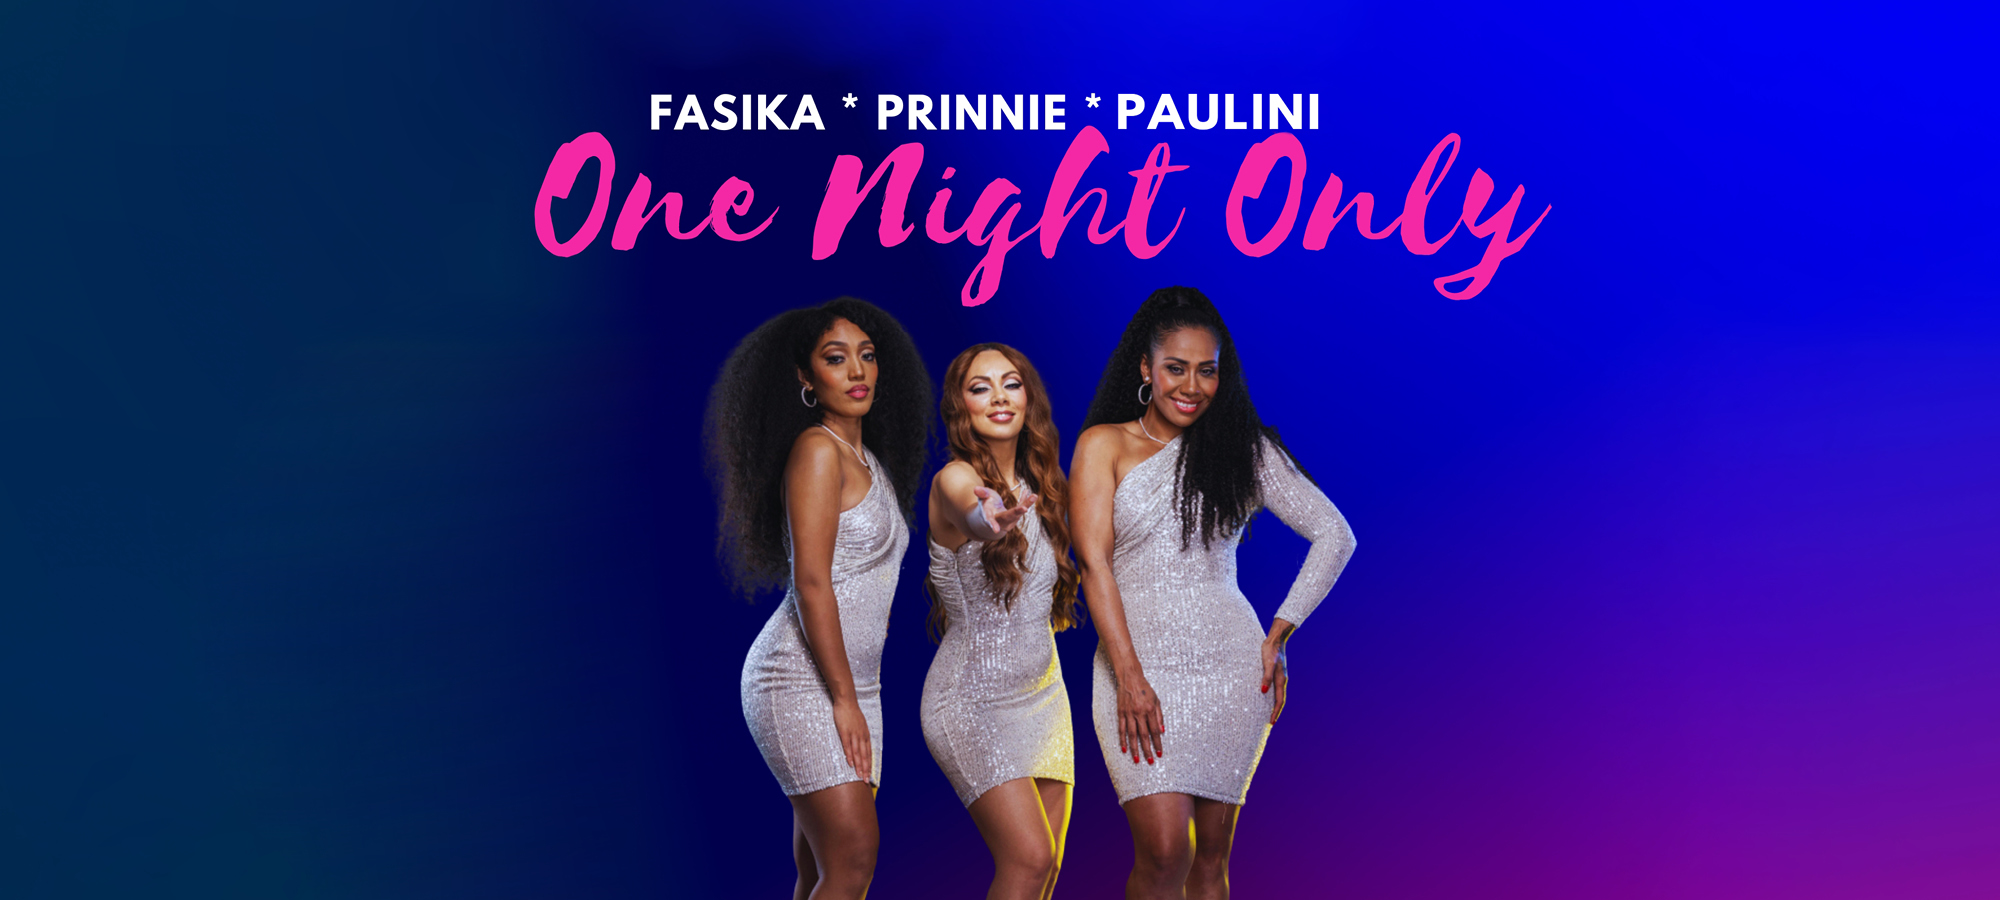 One Night Only ft Paulini, Prinnie & Fasika – Cancelled